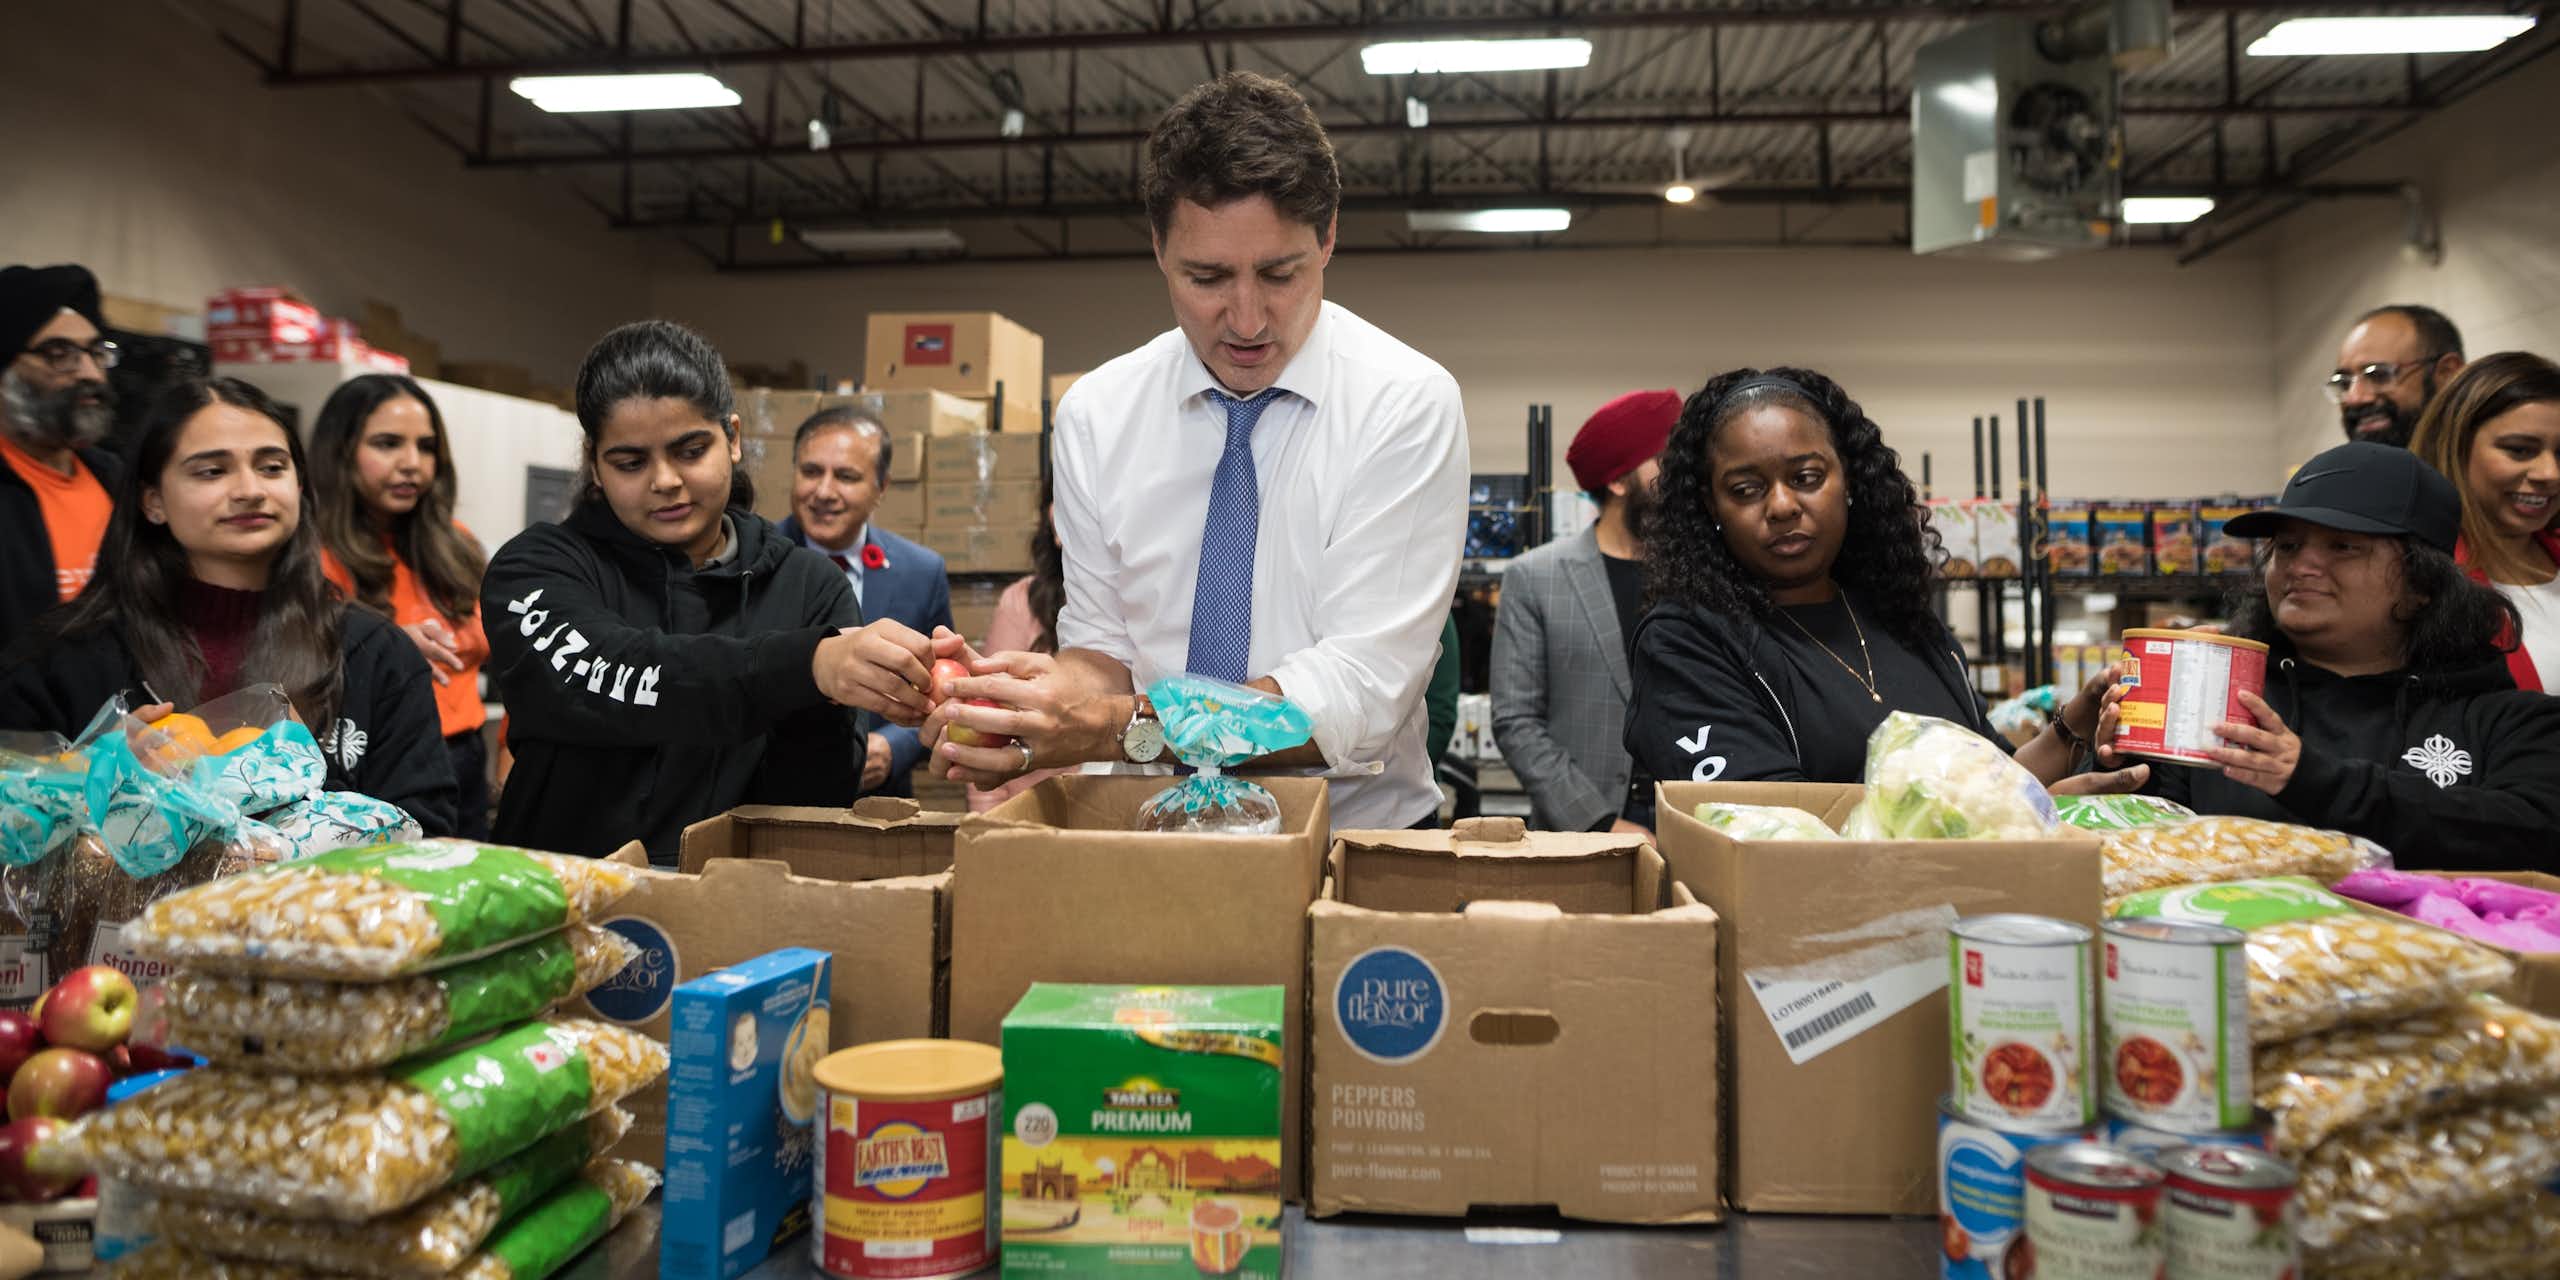 the PM stands in front of food and boxes with women to his right.